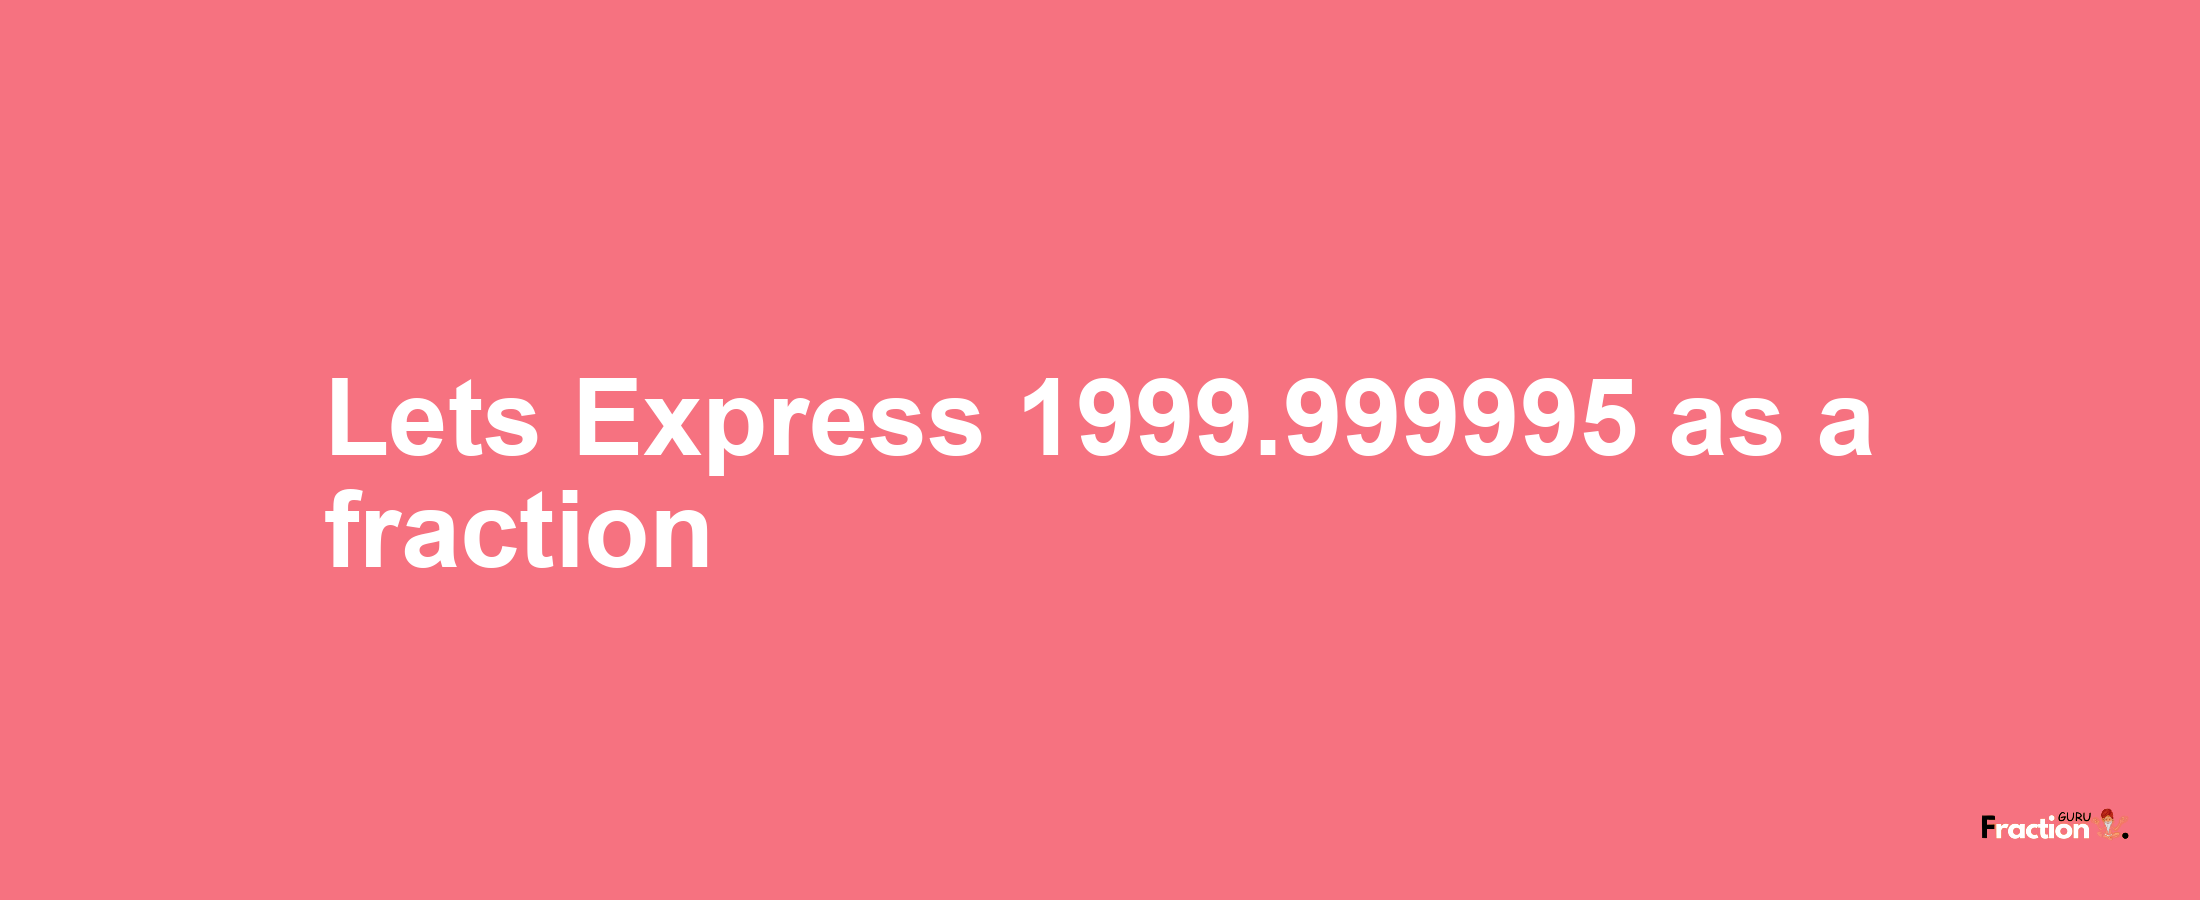 Lets Express 1999.999995 as afraction